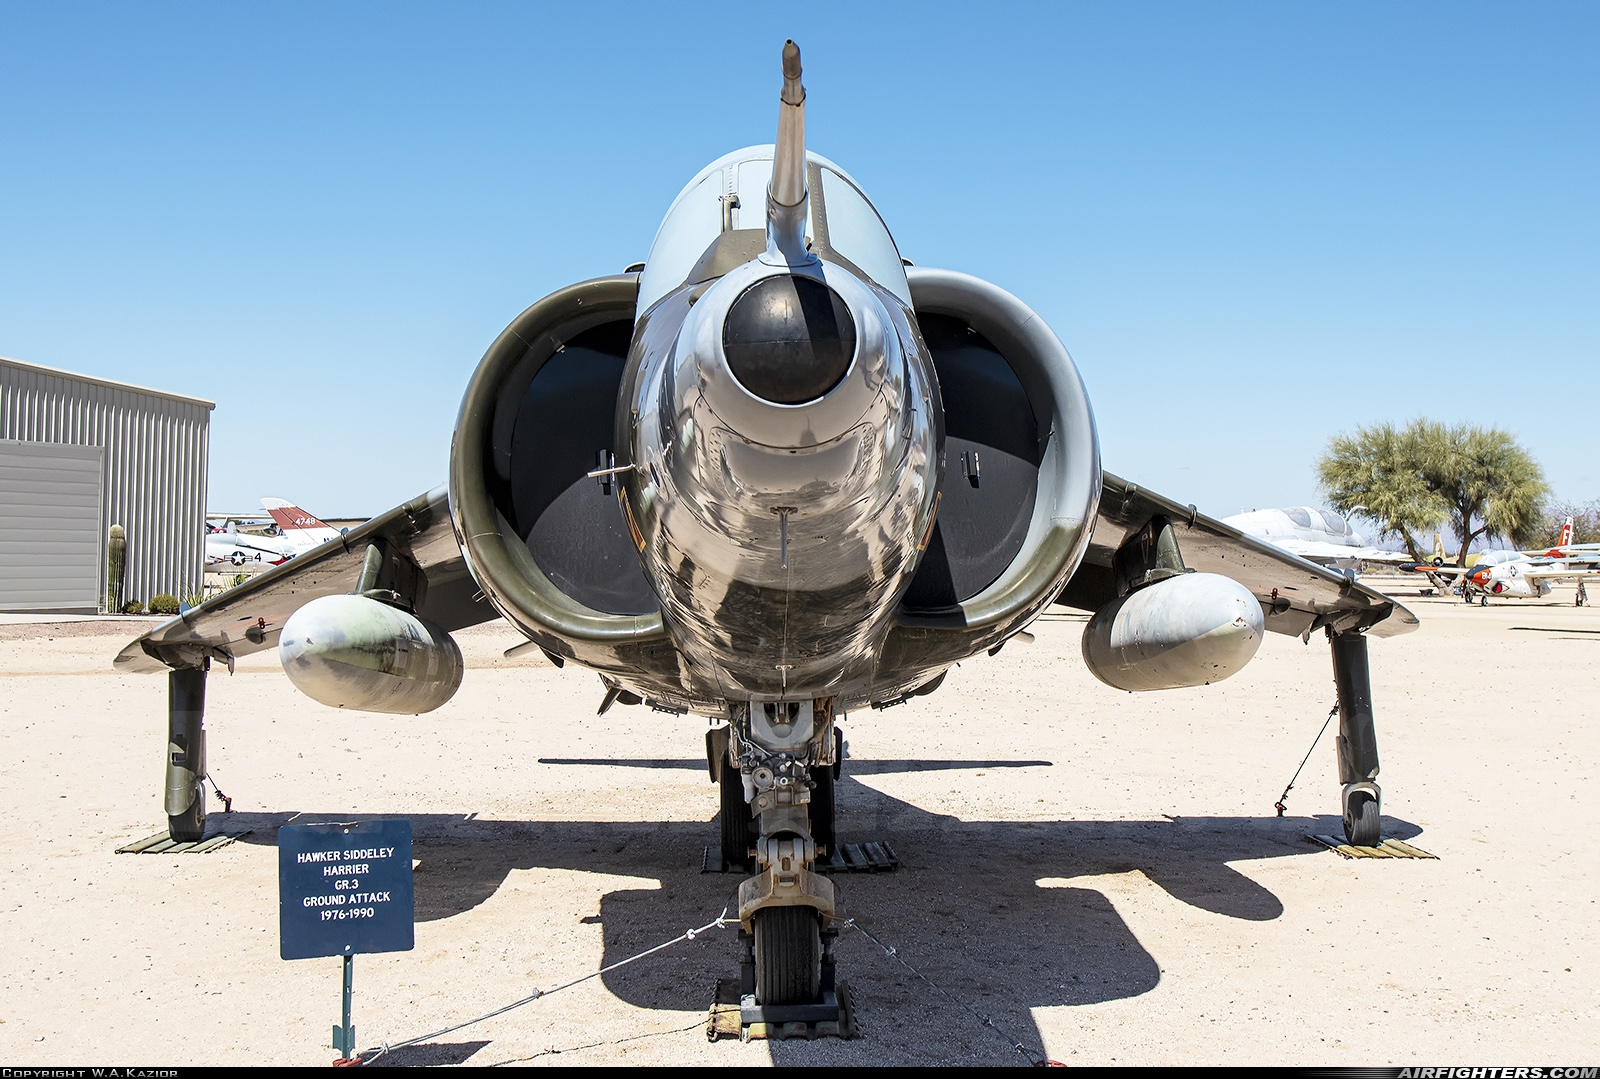 UK - Air Force Hawker Siddeley Harrier GR.3 XV804 at Tucson - Pima Air and Space Museum, USA